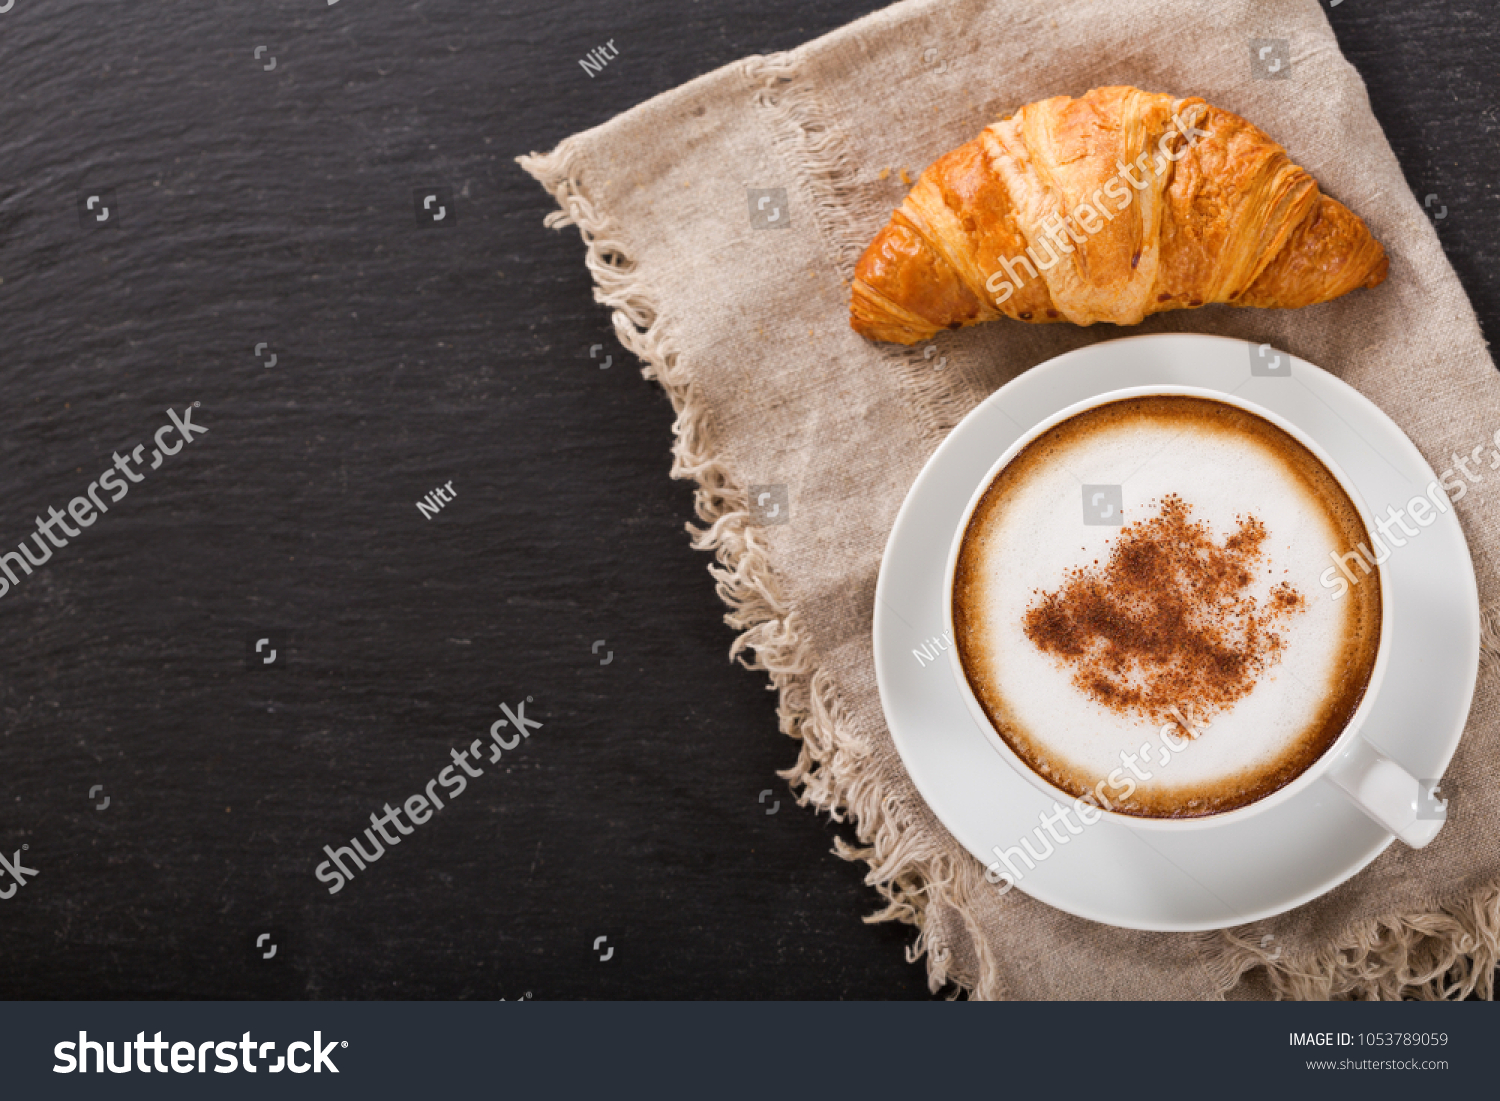 Cup of cappuccino coffee and croissant on dark table, top view #1053789059